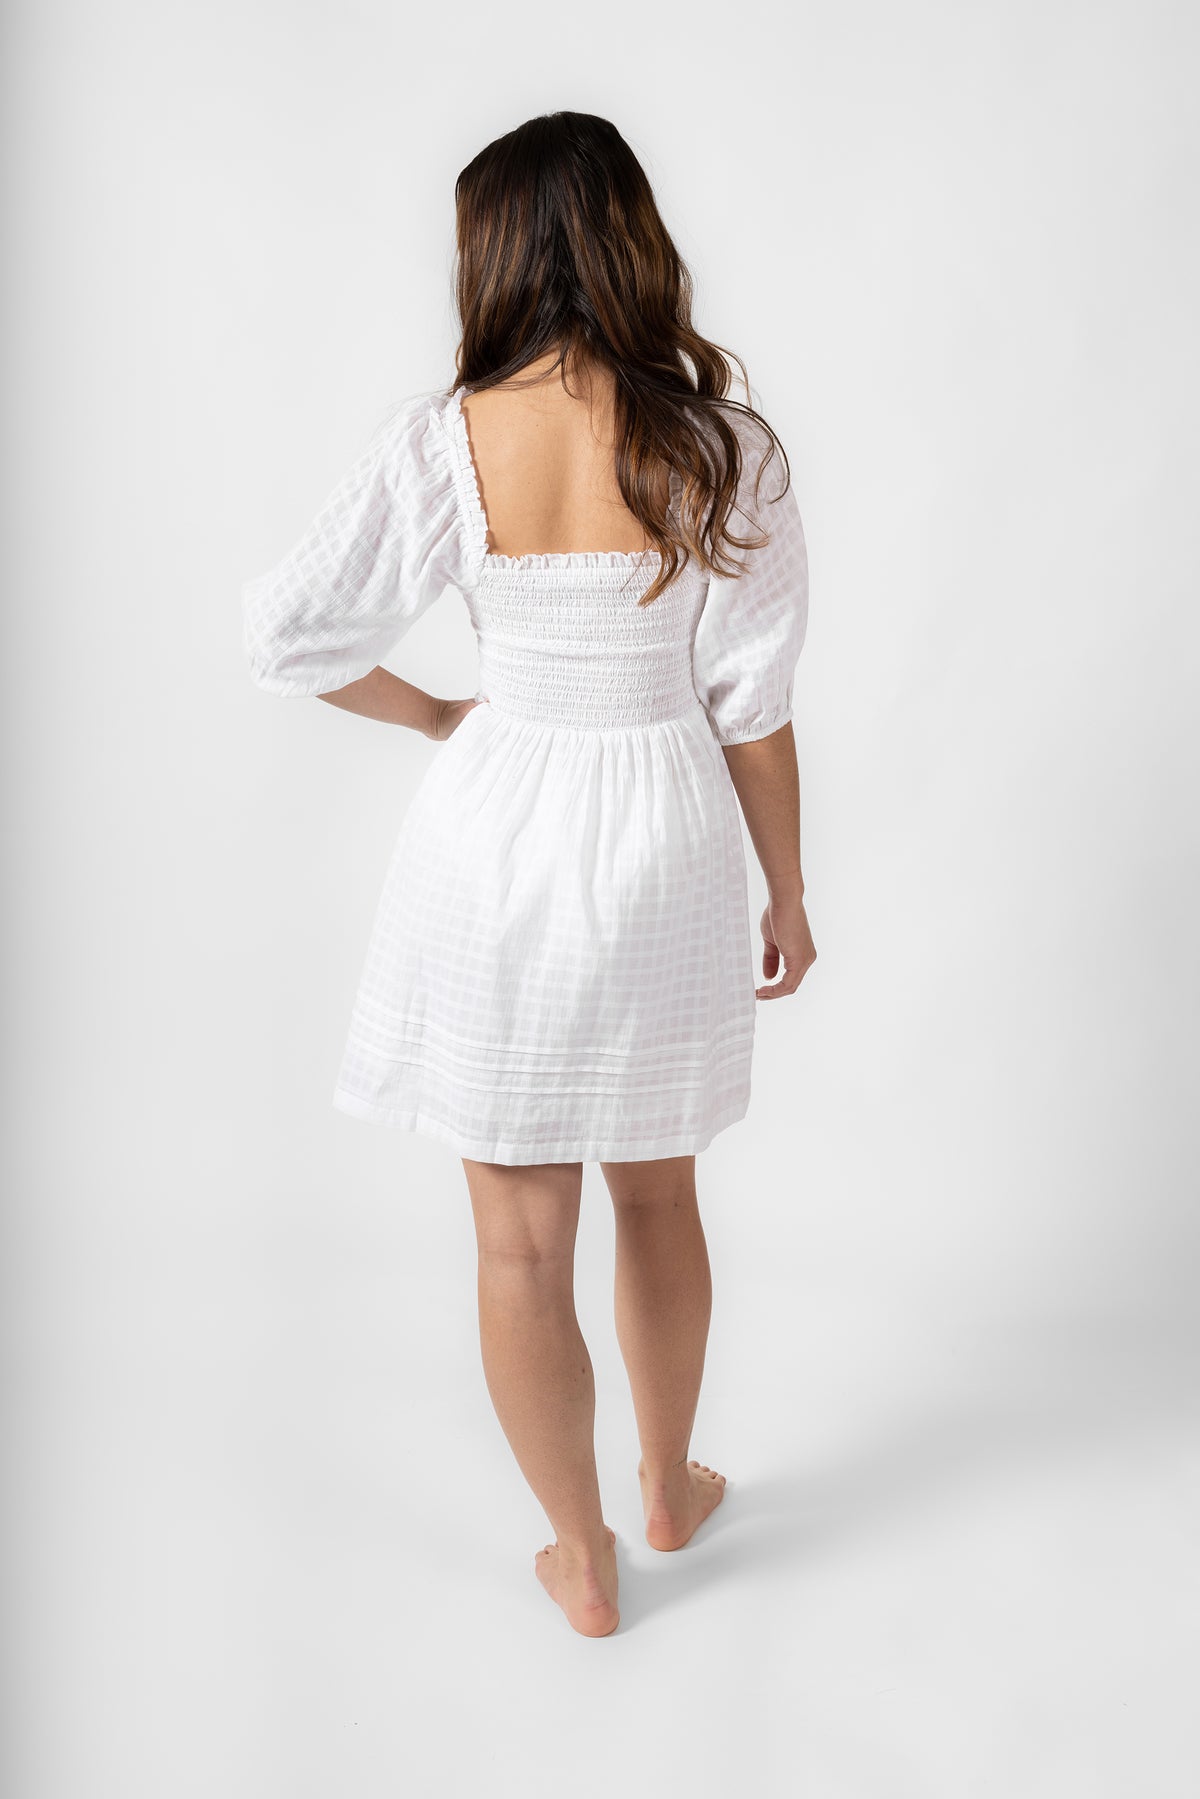 the back of a brunette hair model wearing a square back smocked short sleeve white dress from Koy Resort with one hand on her waist